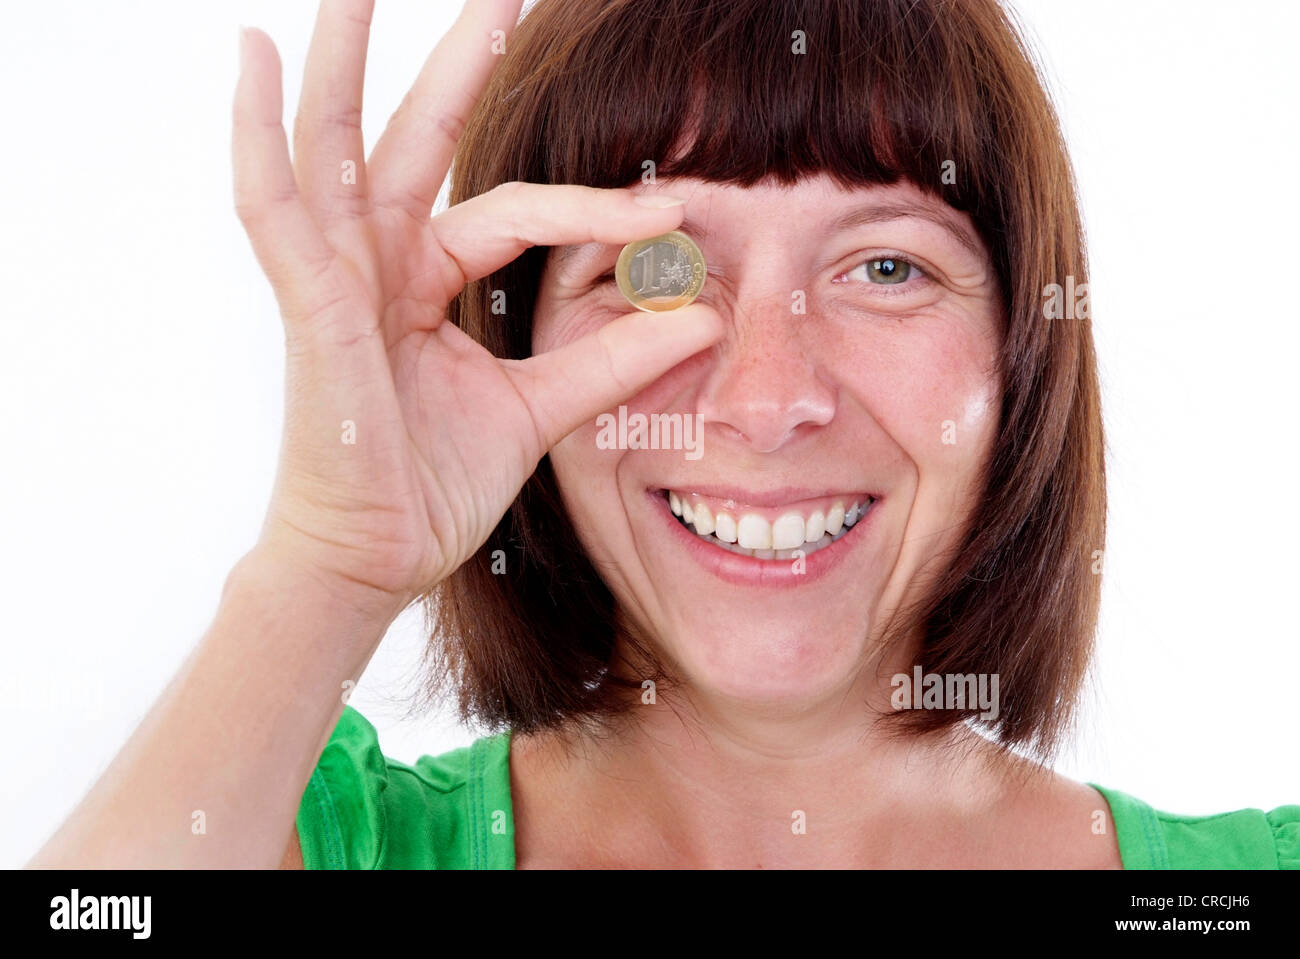 brown-haired woman holding an Euro coin in front of her eye Stock Photo